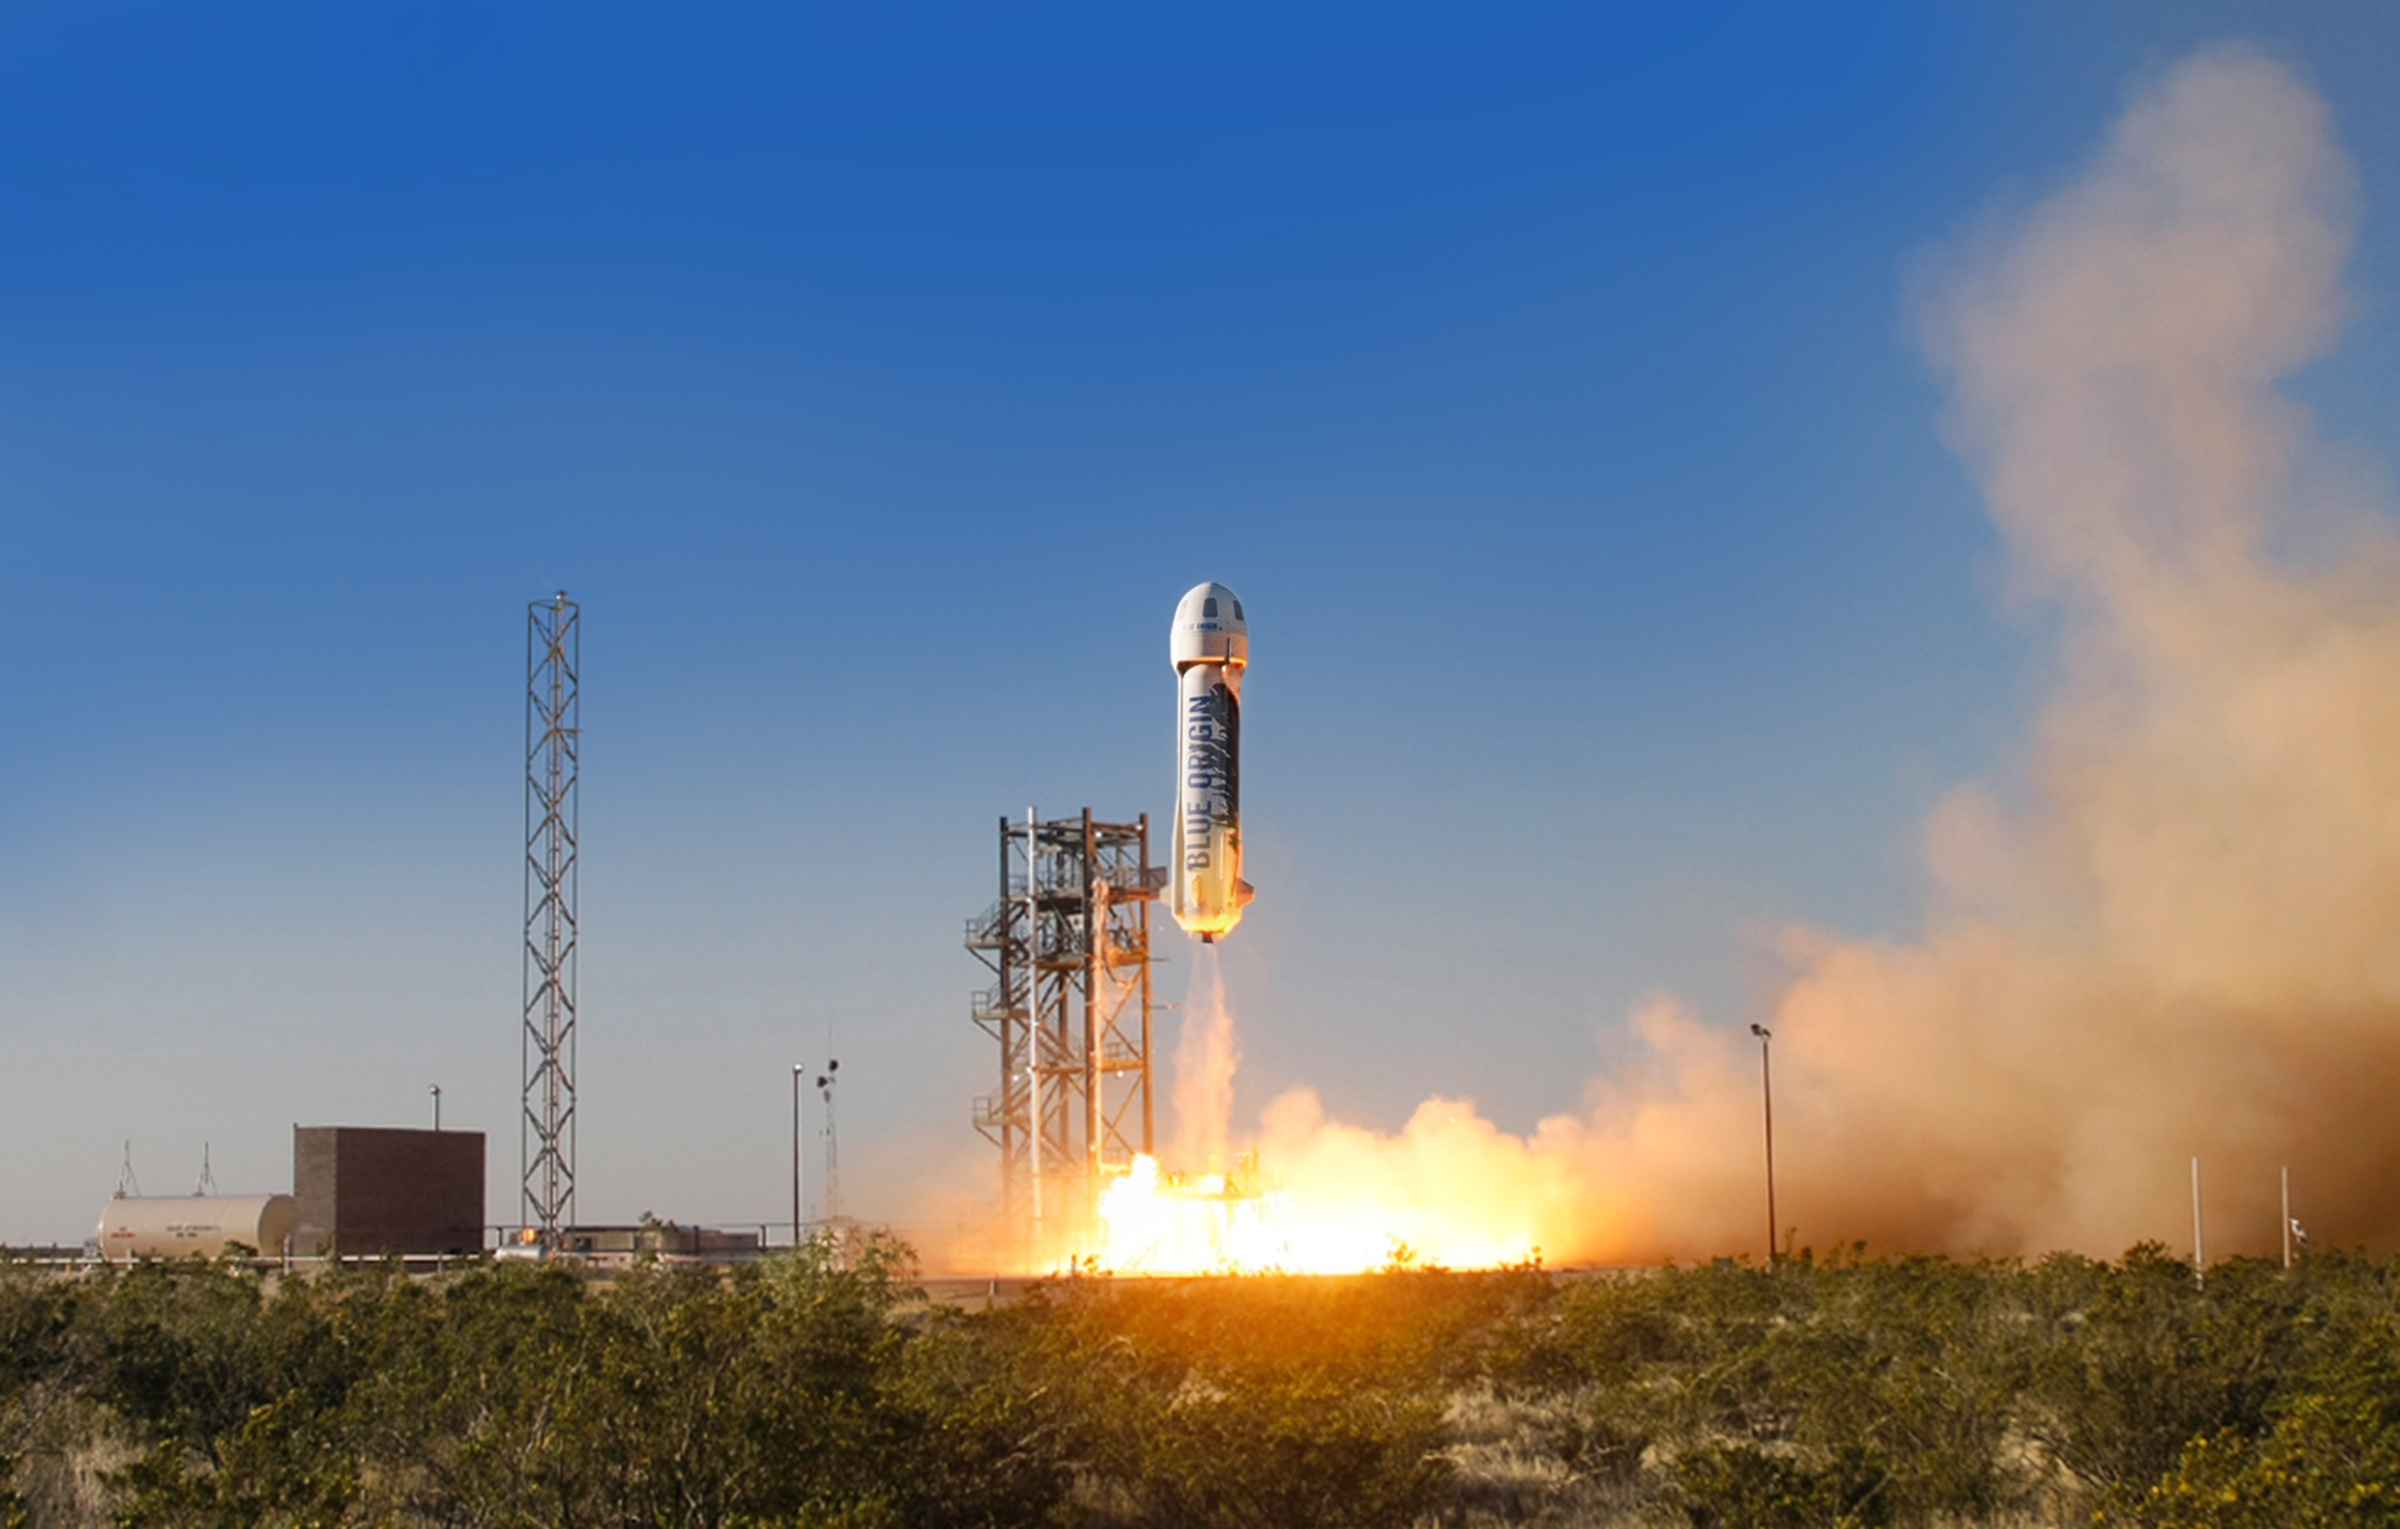 The New Shepard space vehicle blasts off on its first developmental test flight over Blue Origin’s West Texas Launch Site. The crew capsule reached apogee at 307,000 feet before beginning its descent back to Earth.  Credit: Blue Origin